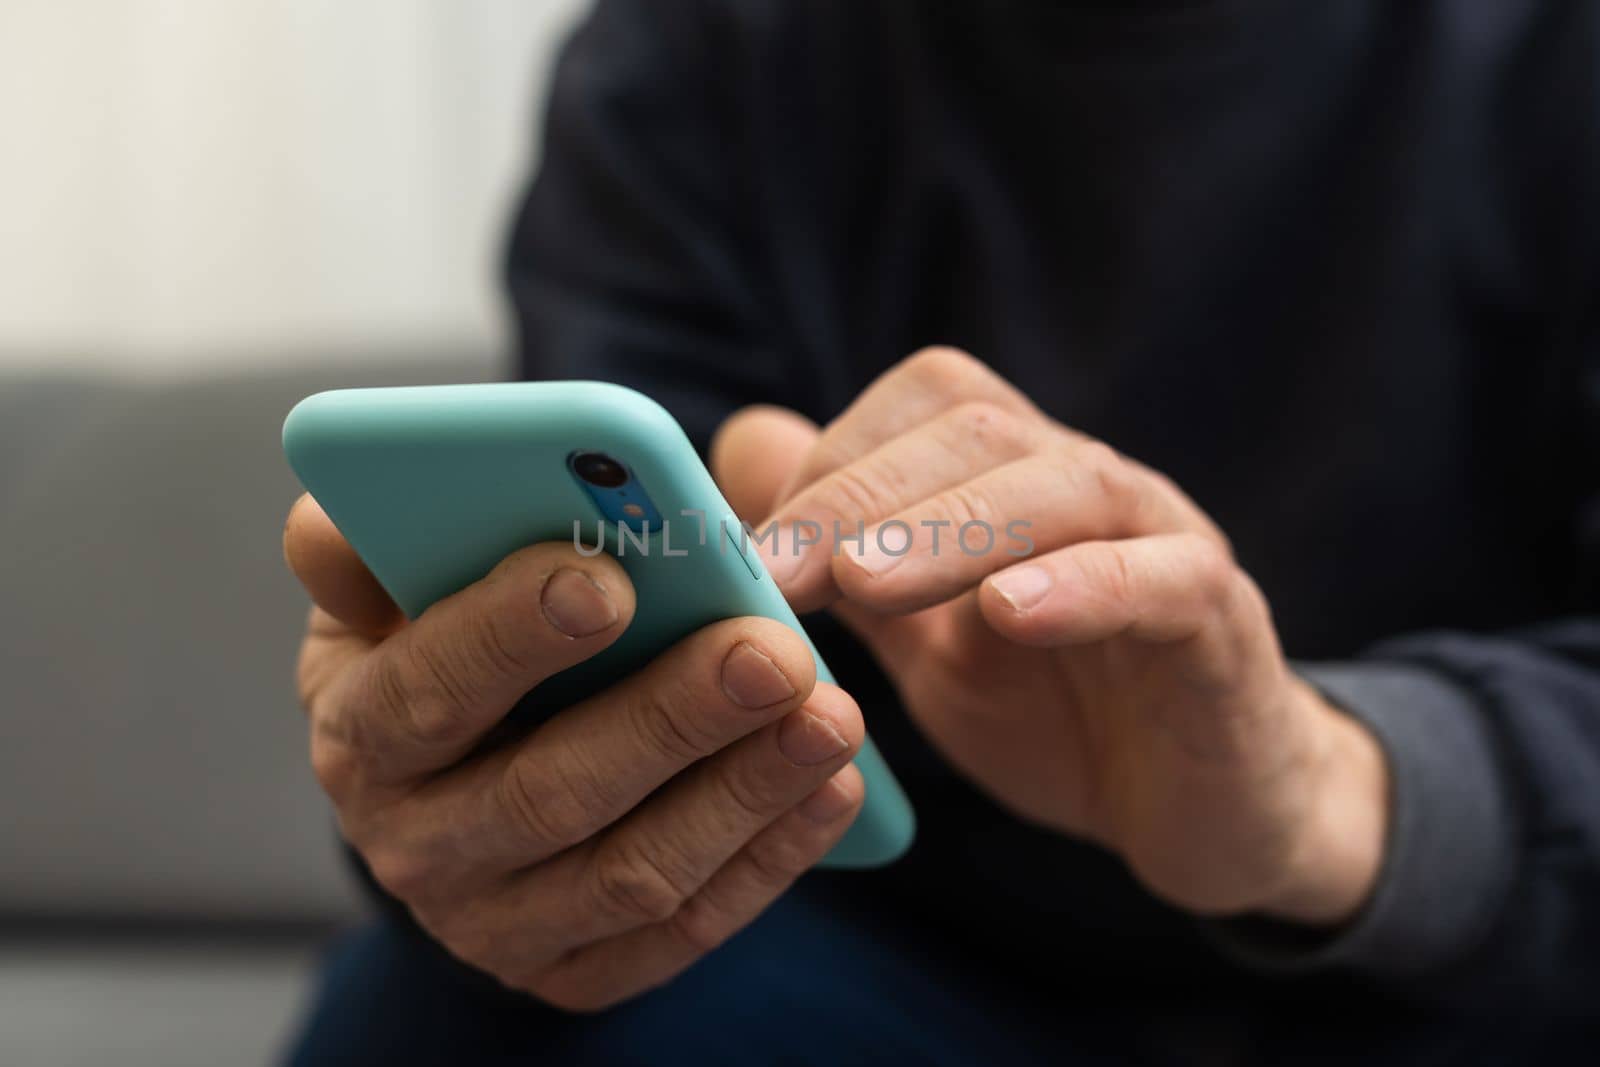 Elderly man using smartphone, mobile phone in male hands close up. Concept of online communication in retirement, sms, social media